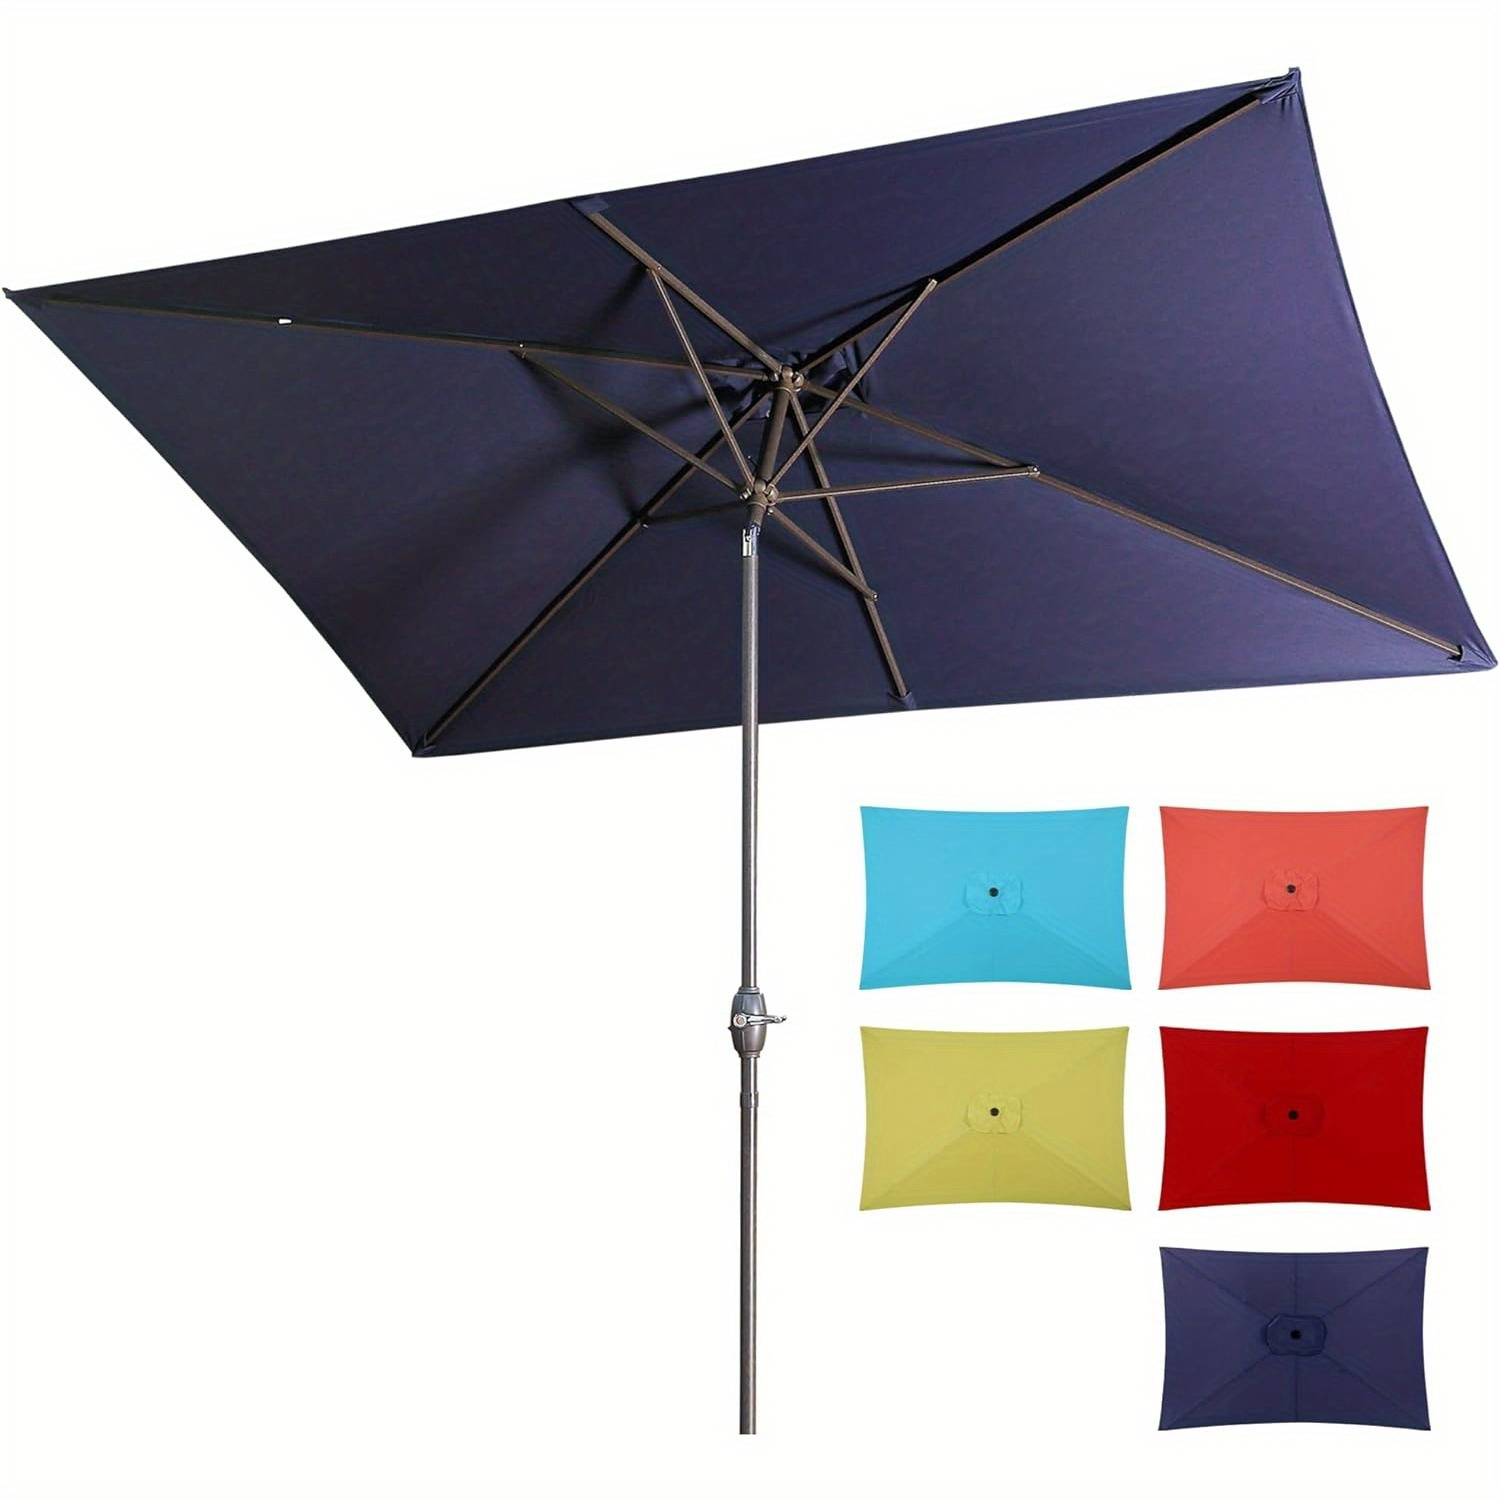 

Outdoor 6.5 X 10 Ft Rectangular Patio Umbrella Aluminum Pole With Led Light, Outdoor Table Market Umbrella With Crank, 6 Steel Ribs, Polyester Canopy